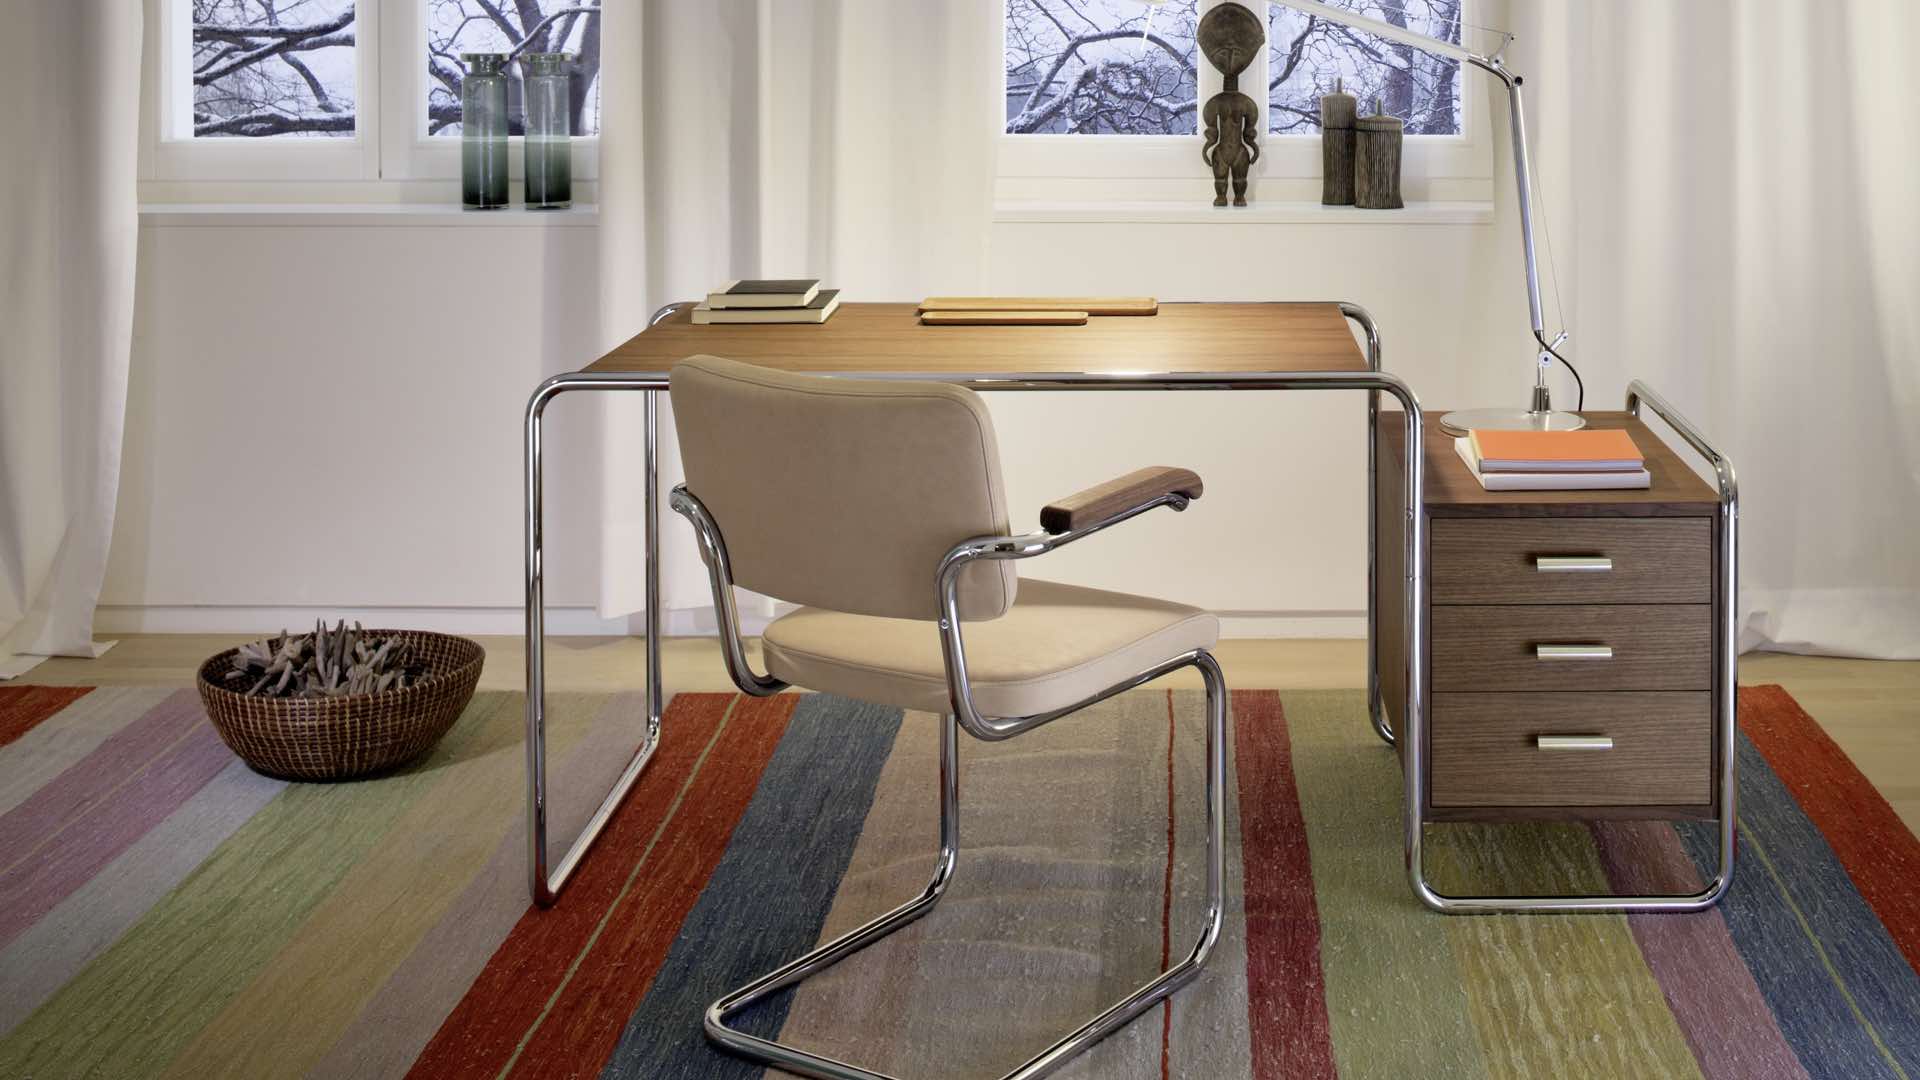 thonet-s64pv-pure-materials-s285-ambiente